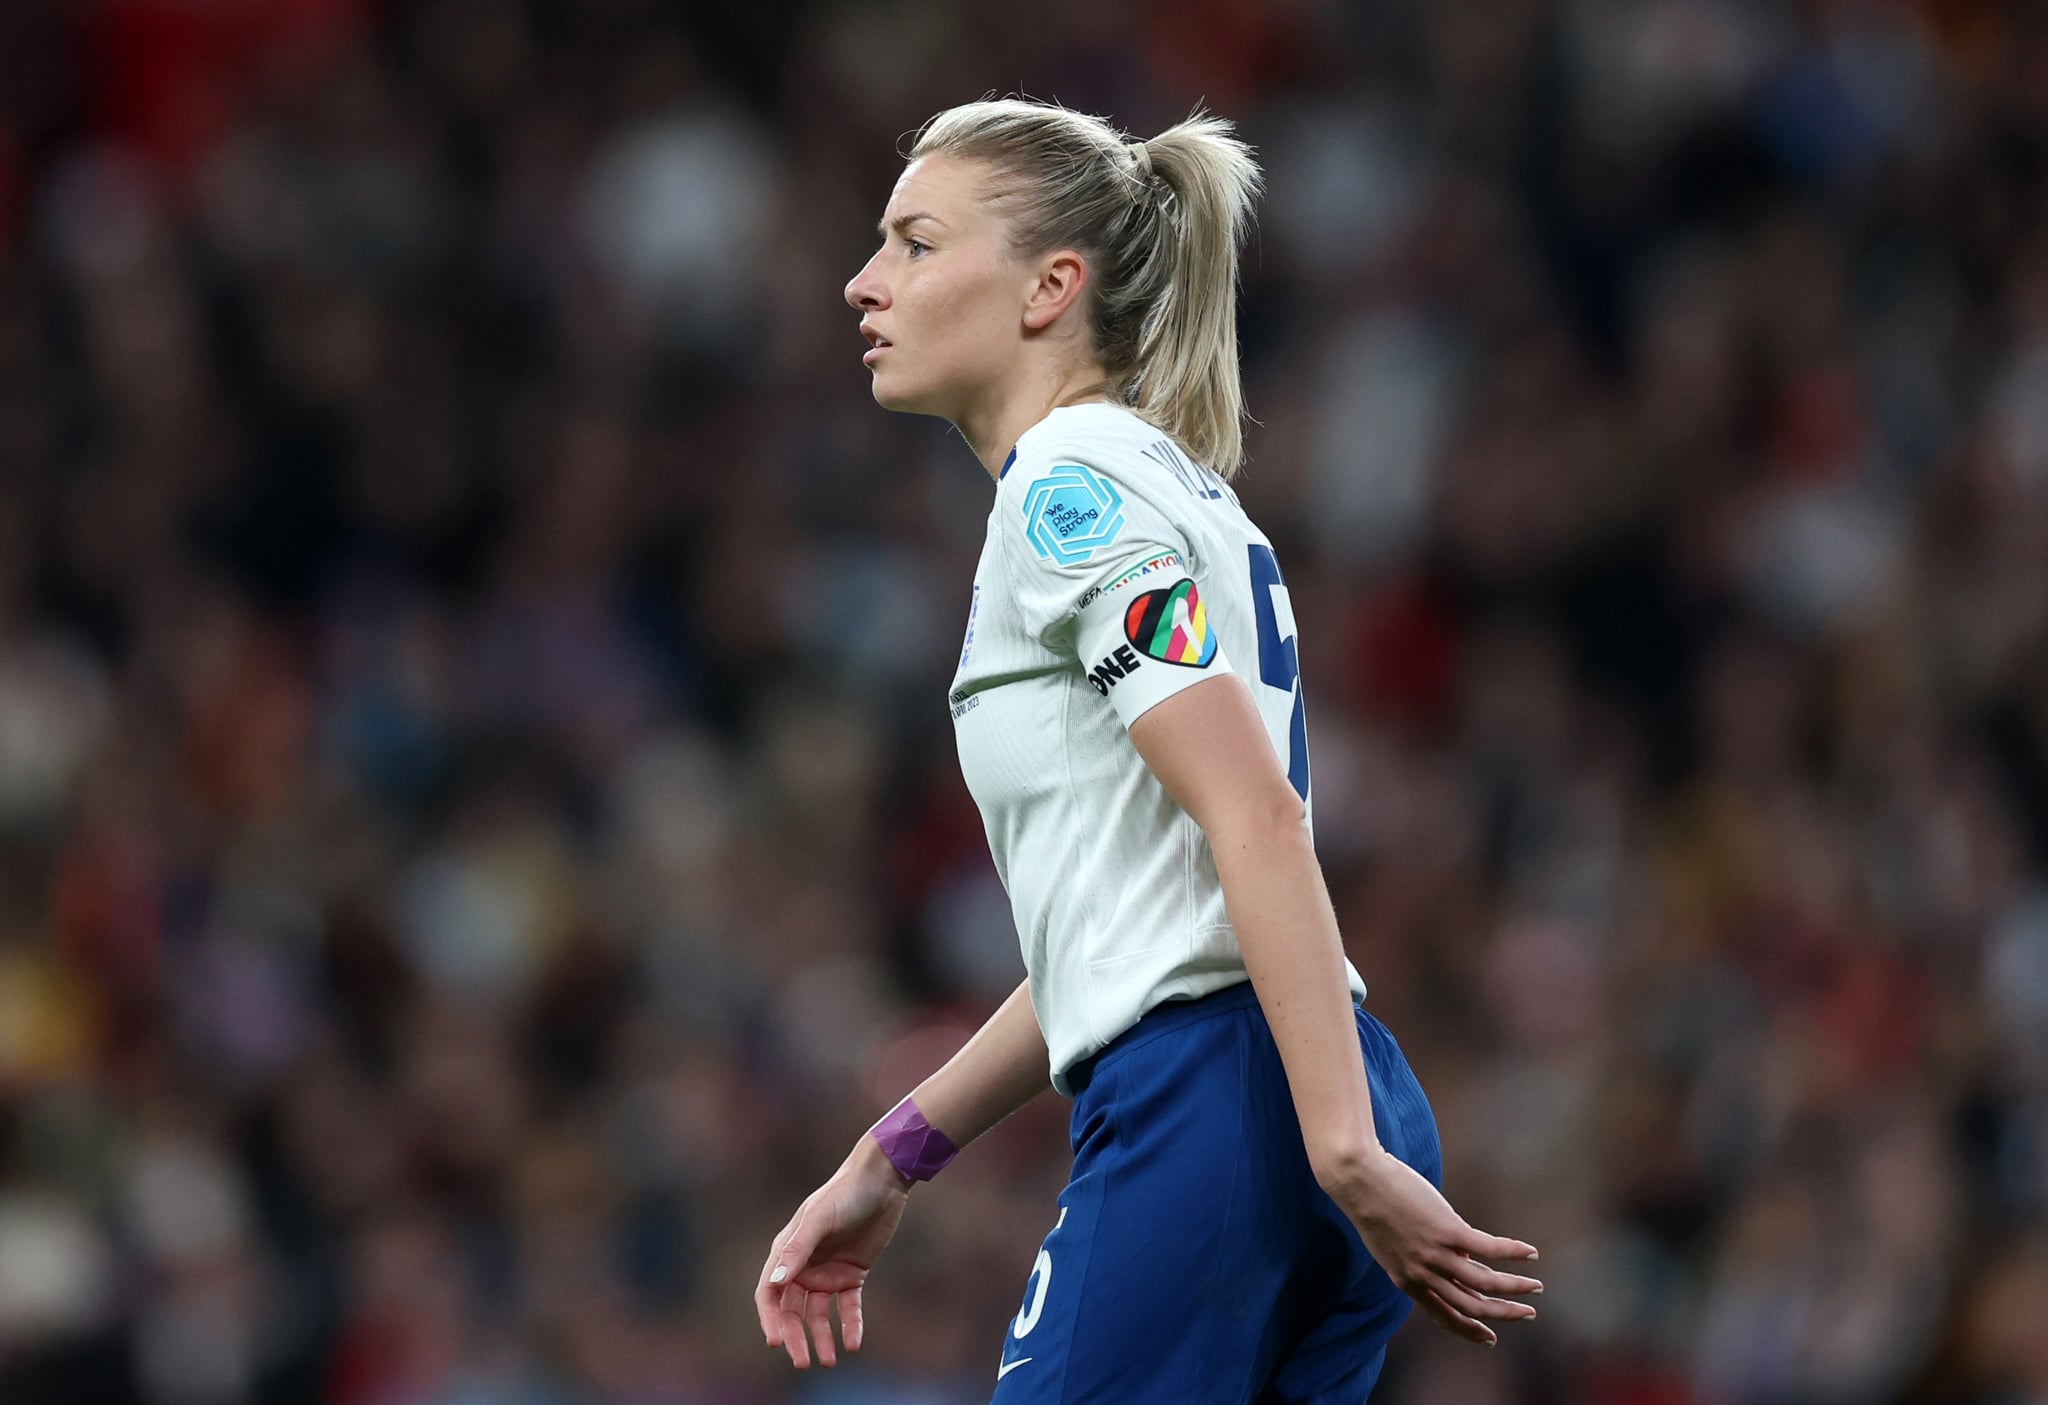 LONDON, ENGLAND - APRIL 06: Leah Williamson of England during the Women´s Finalissima 2023 match between England and Brazil at Wembley Stadium on April 06, 2023 in London, England. (Photo by Catherine Ivill - UEFA/UEFA via Getty Images)